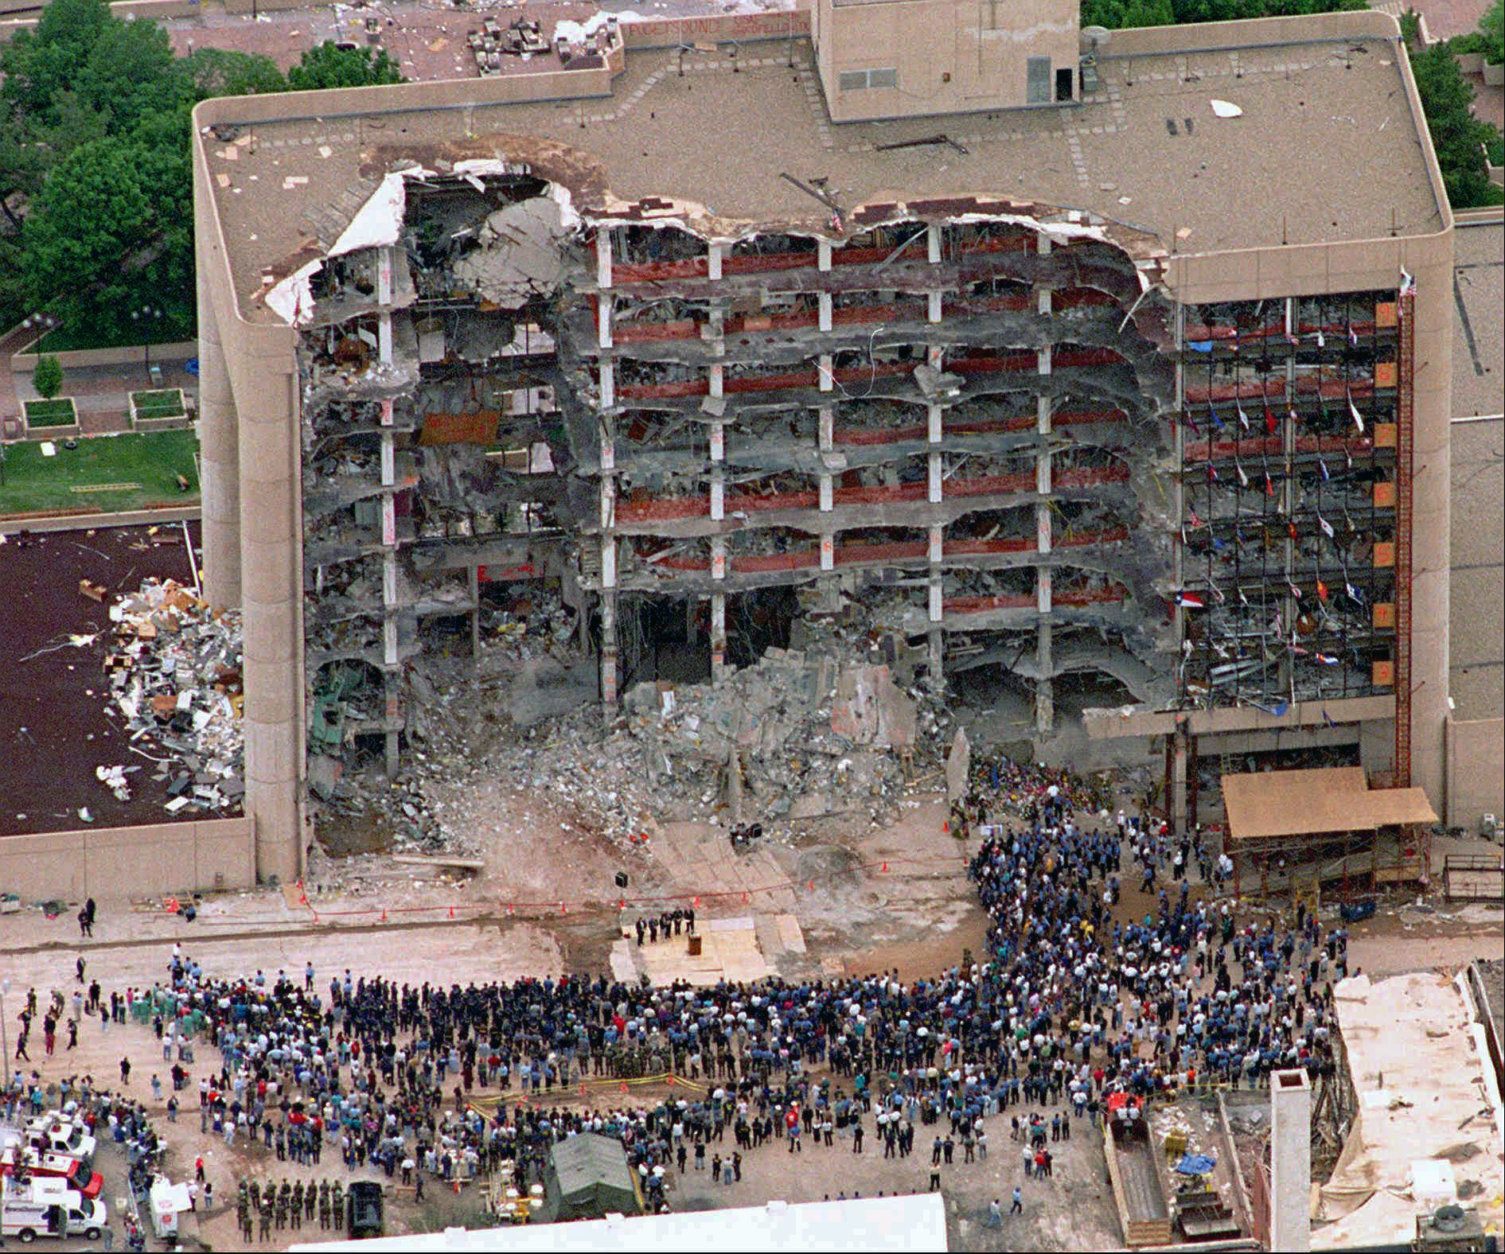 FILE - In this May 5, 1995 file photo, thousands of search and rescue crews attend a memorial service in front of the Alfred P. Murrah Federal Building in Oklahoma City.  More than 600 people were injured in the April 19, 1995 attack and 168 people were killed. Timothy McVeigh was executed in 2001 and Terry Nichols is serving multiple life sentences on federal and state convictions for their convictions in the bombing. (AP Photo/Bill Waugh, FIle)